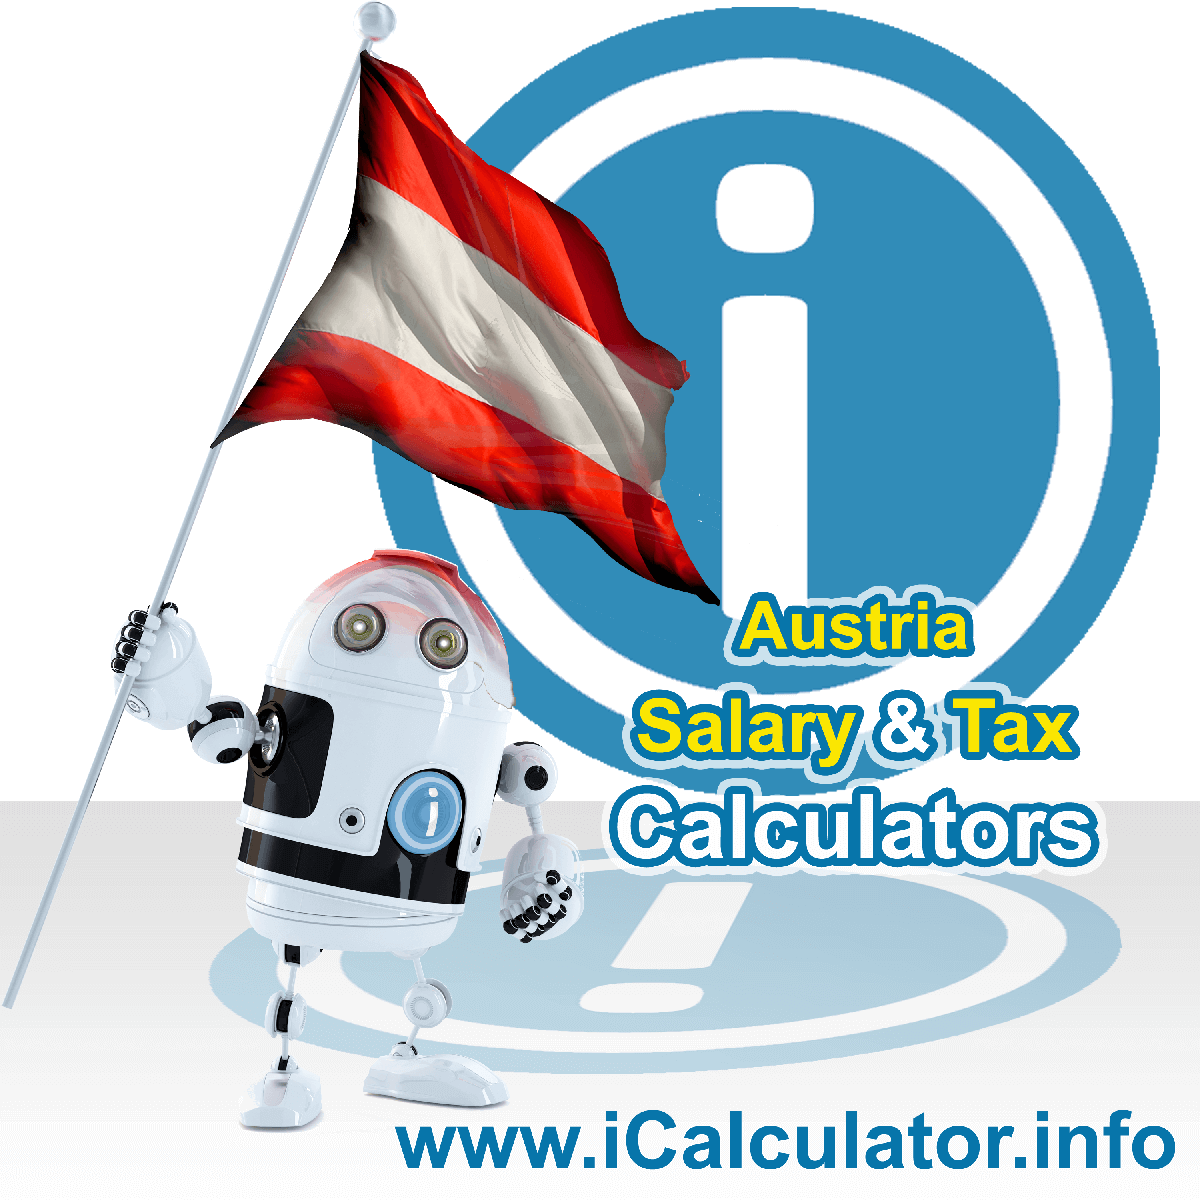 Austria Salary Calculator. This image shows the Austriaese flag and information relating to the tax formula for the Austria Tax Calculator